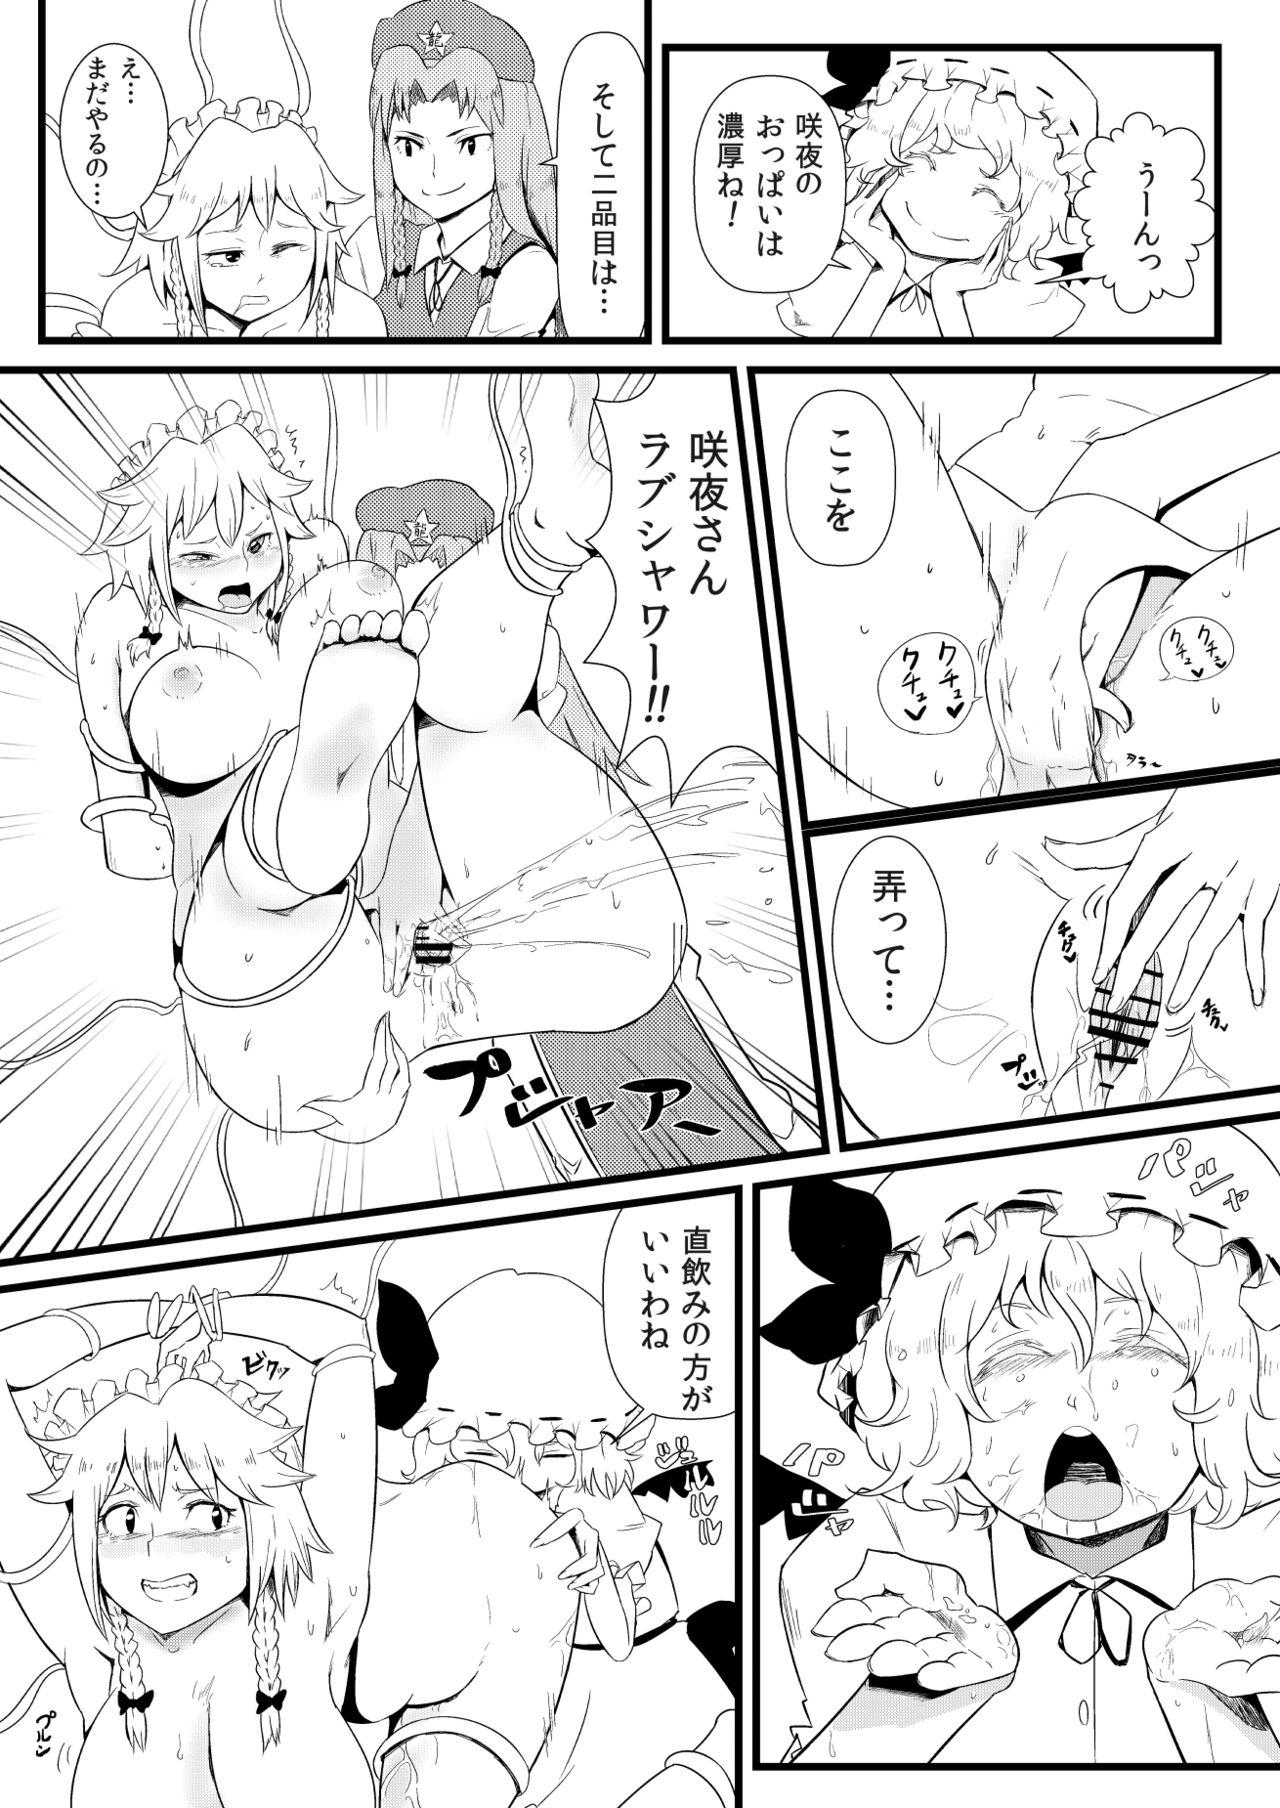 Double Penetration 東方板としあき合同誌5 - Touhou project Dirty Talk - Page 7